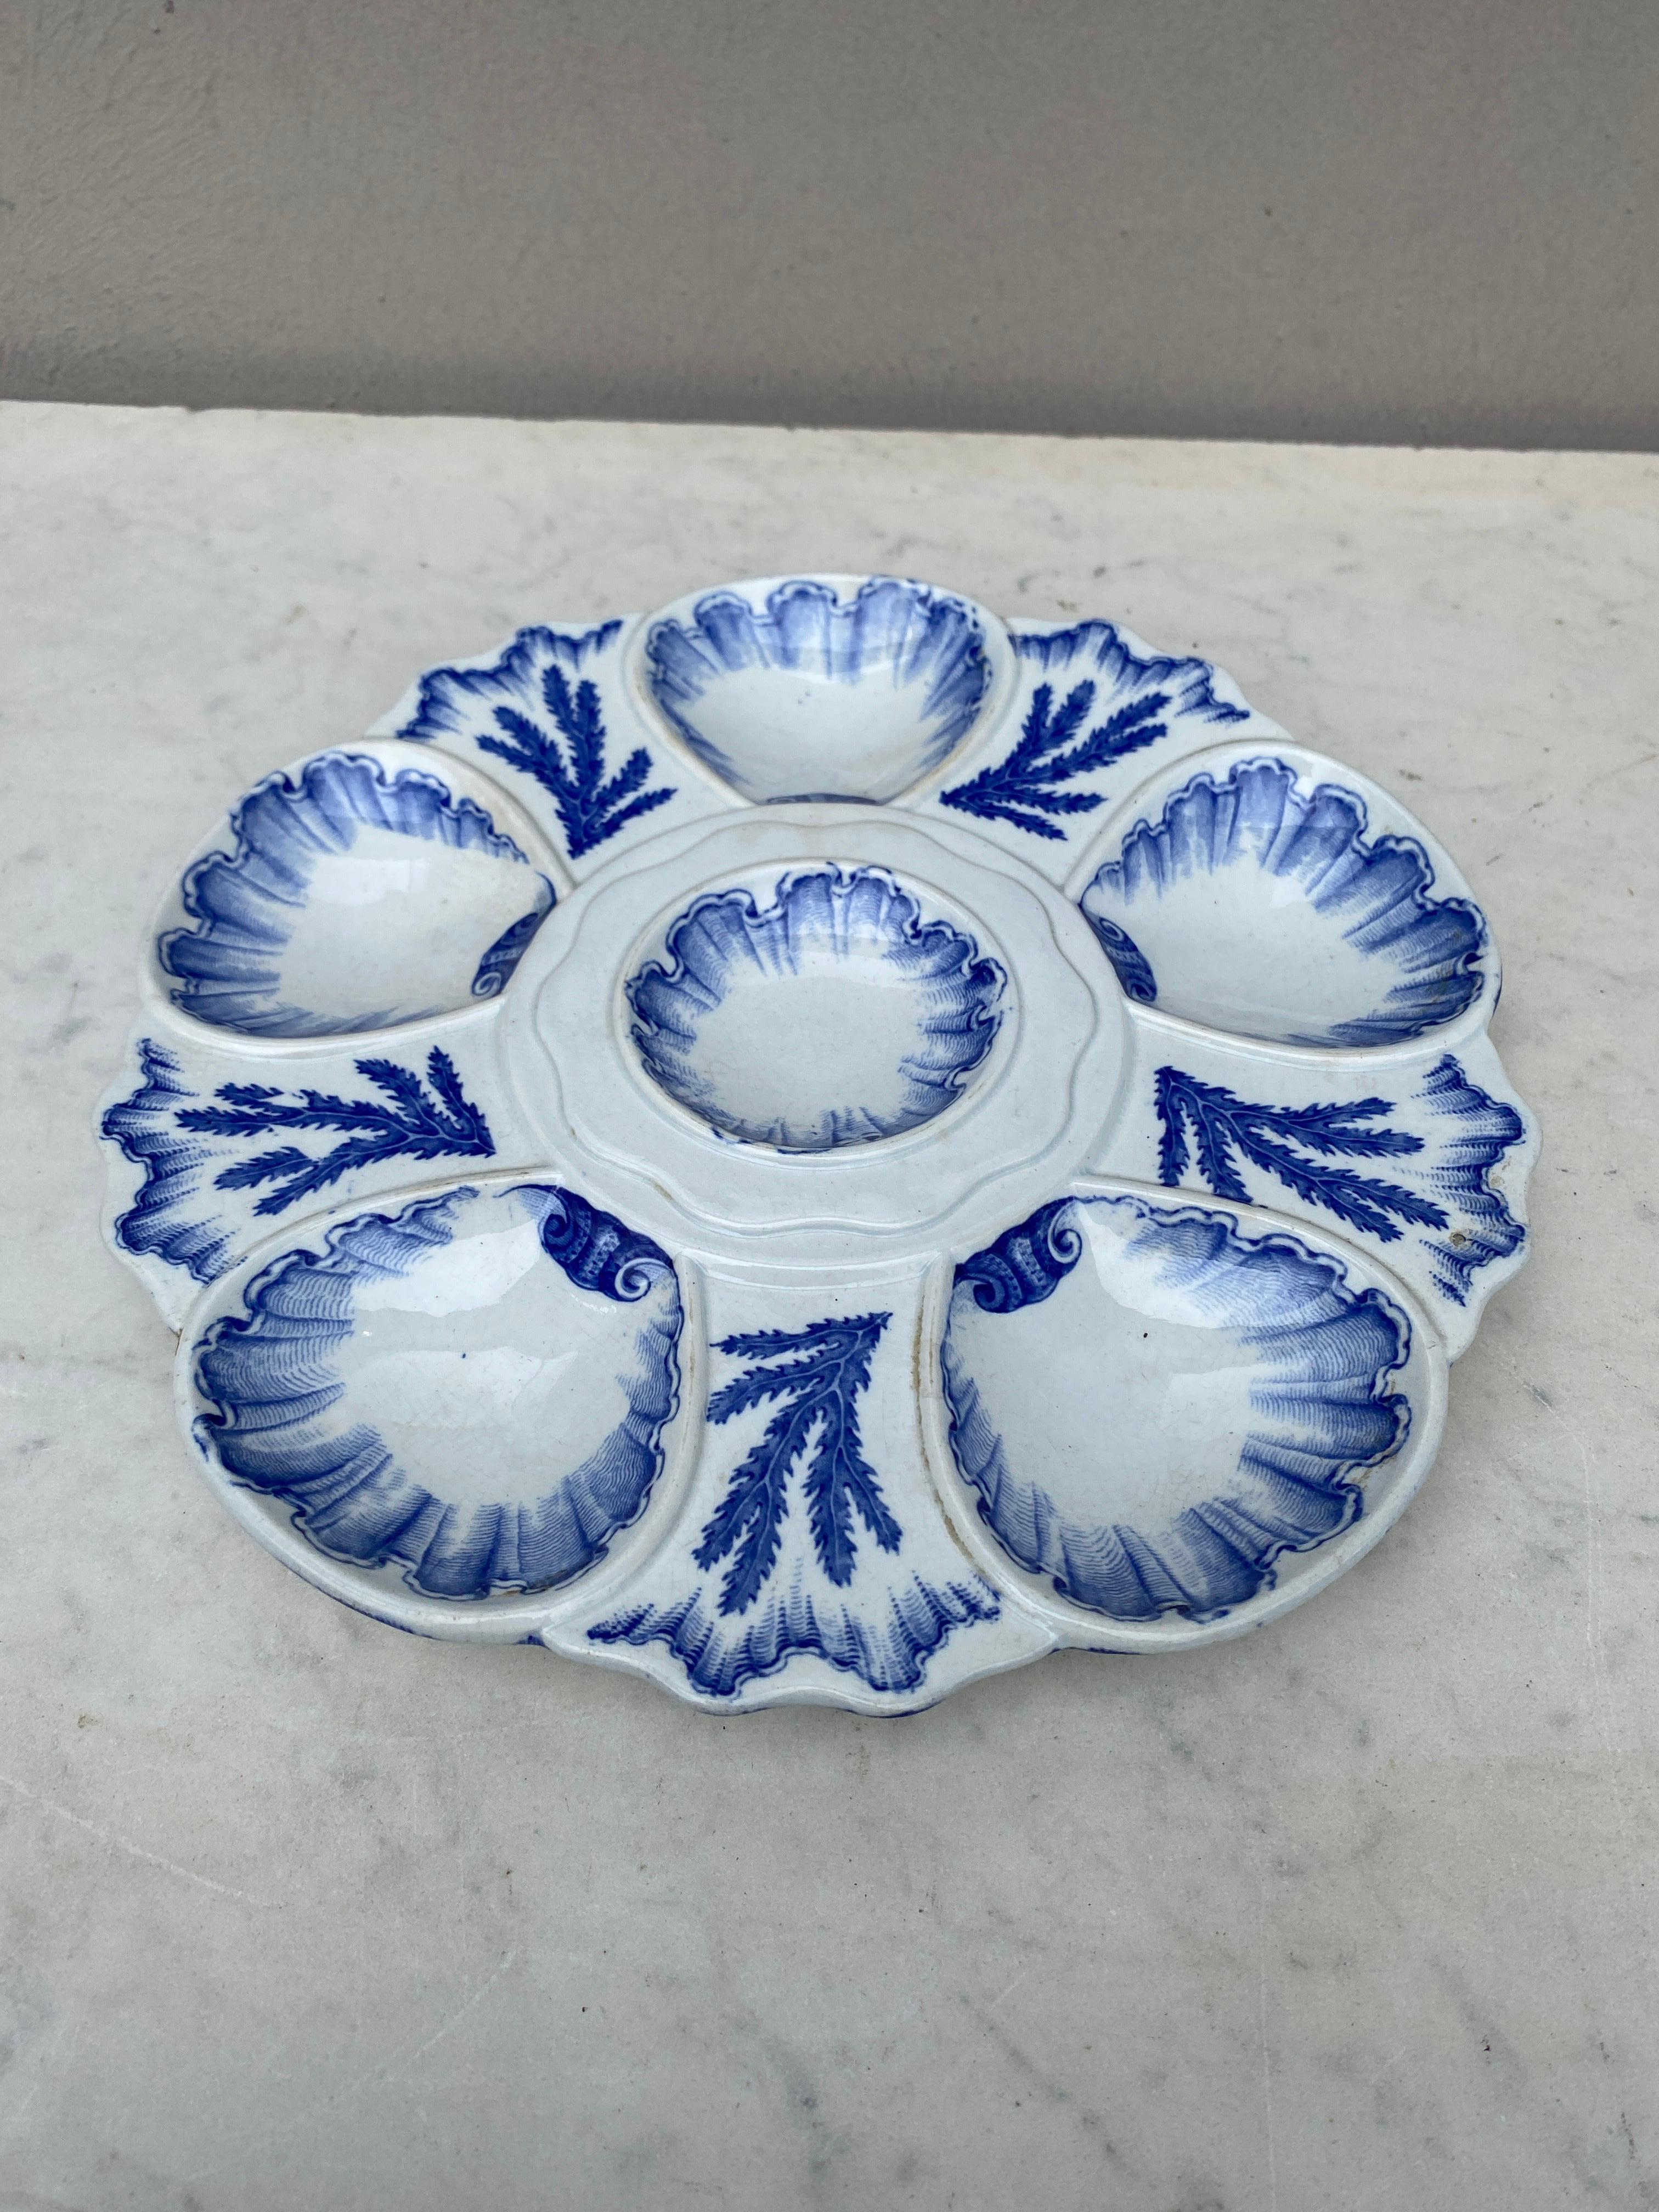 Elegant blue & white oyster plate signed Bordeaux Vieillard, circa 1890.
Six wells surrounded by blue seaweeds of different kinds.